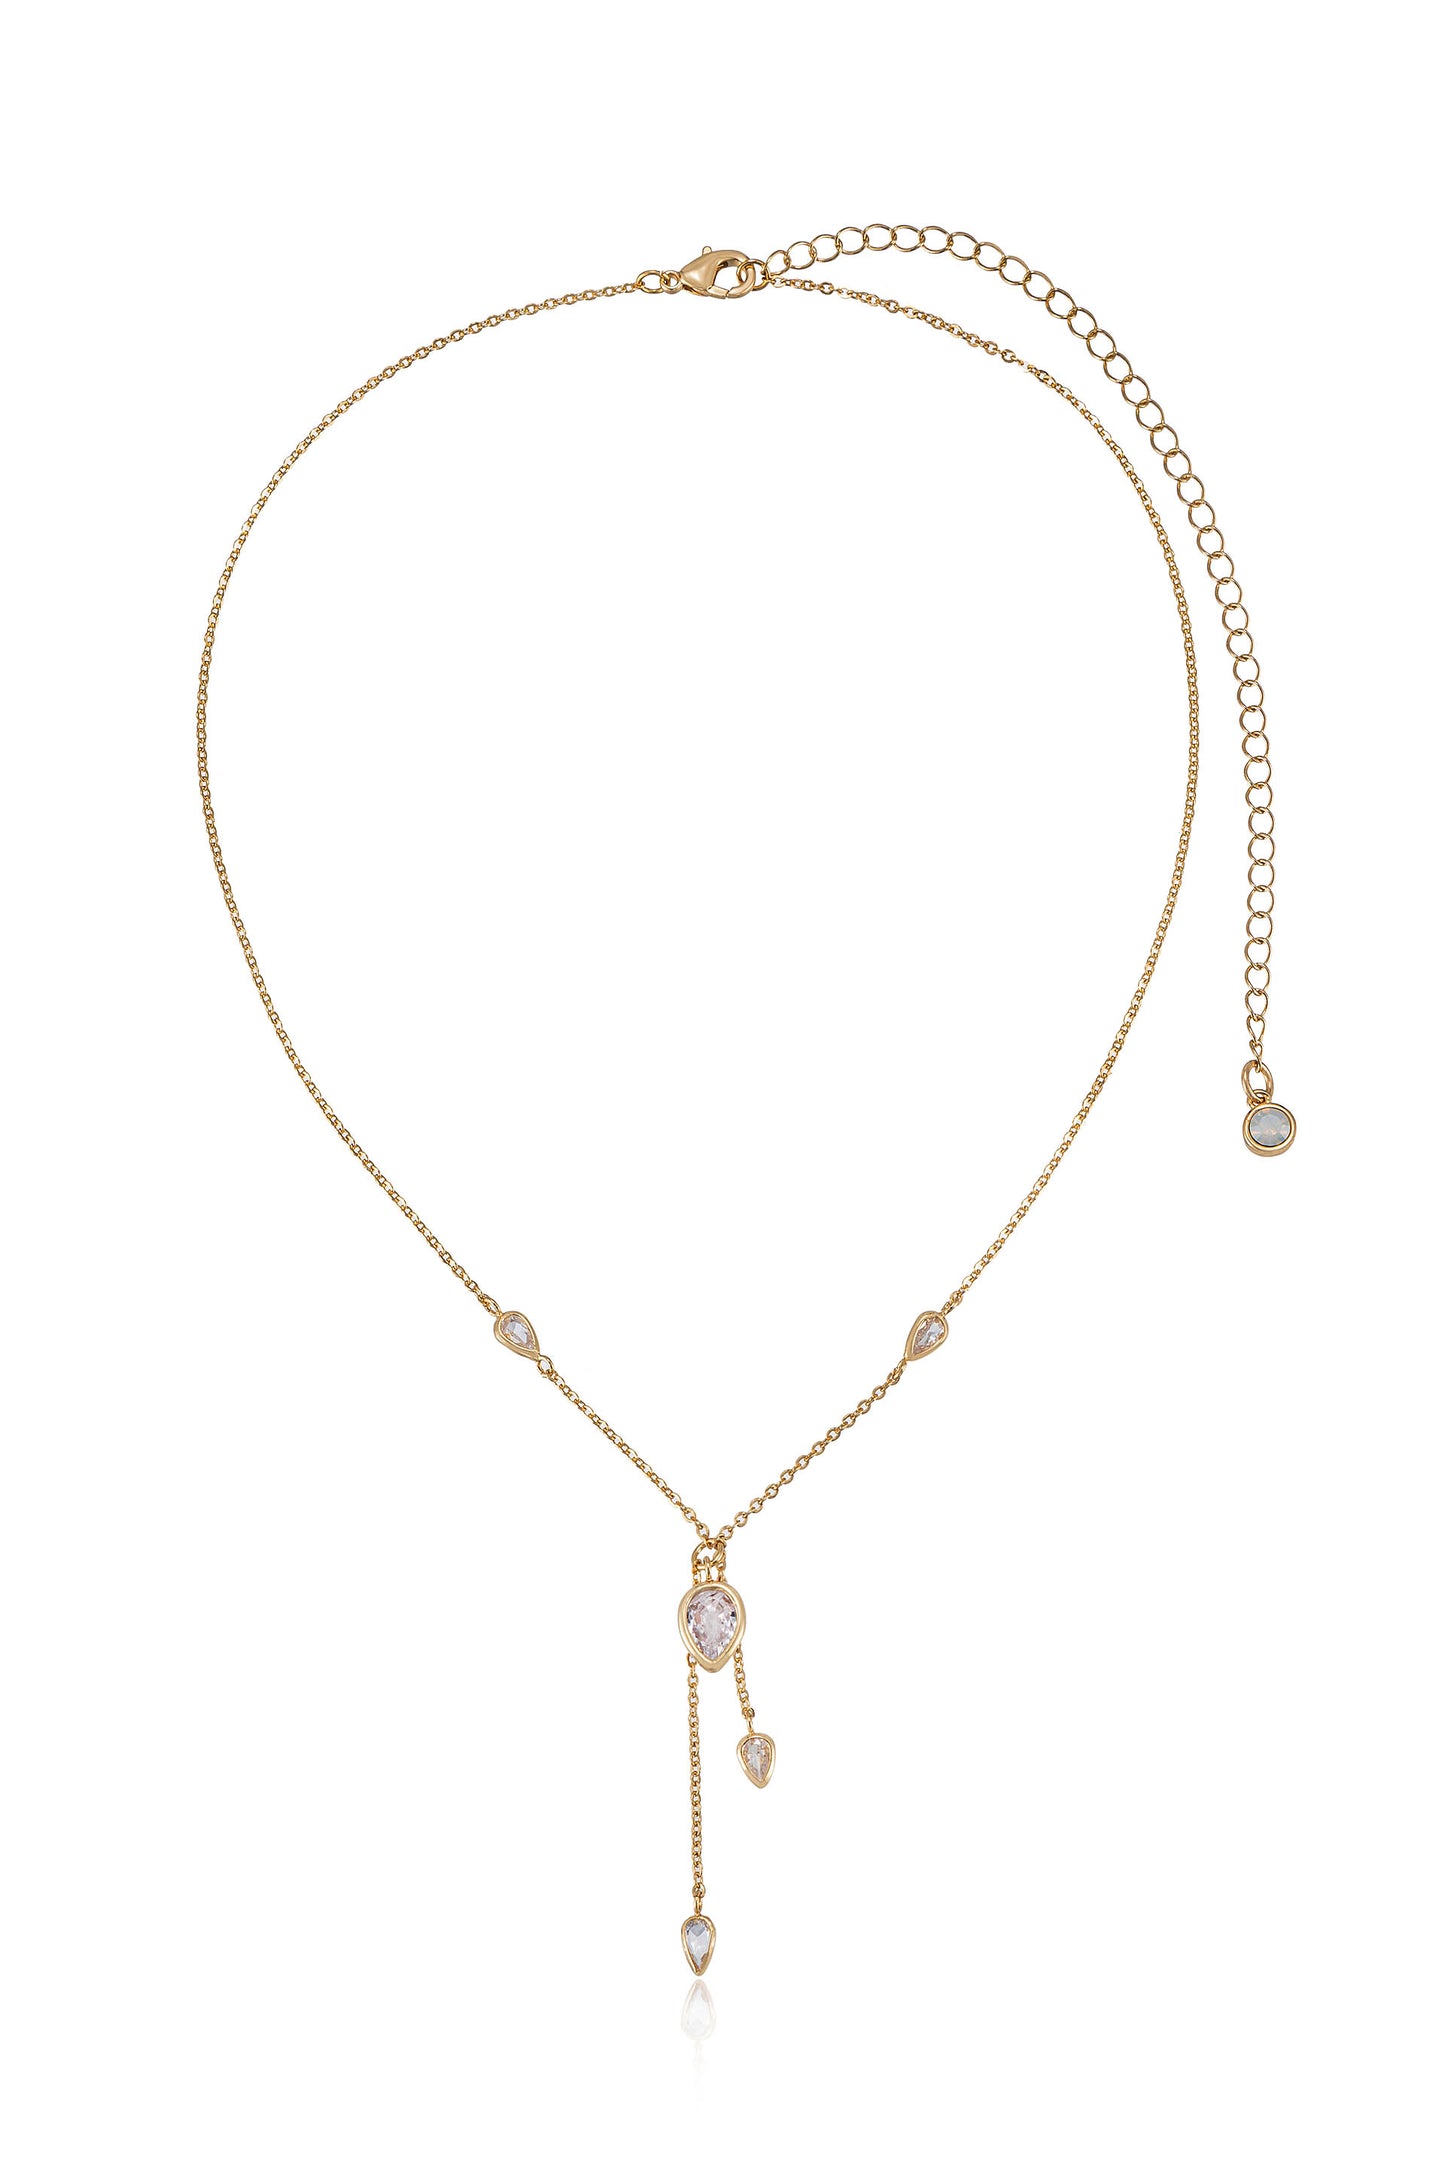 Dangling Bezel Crystal Chain Lariat Necklace full